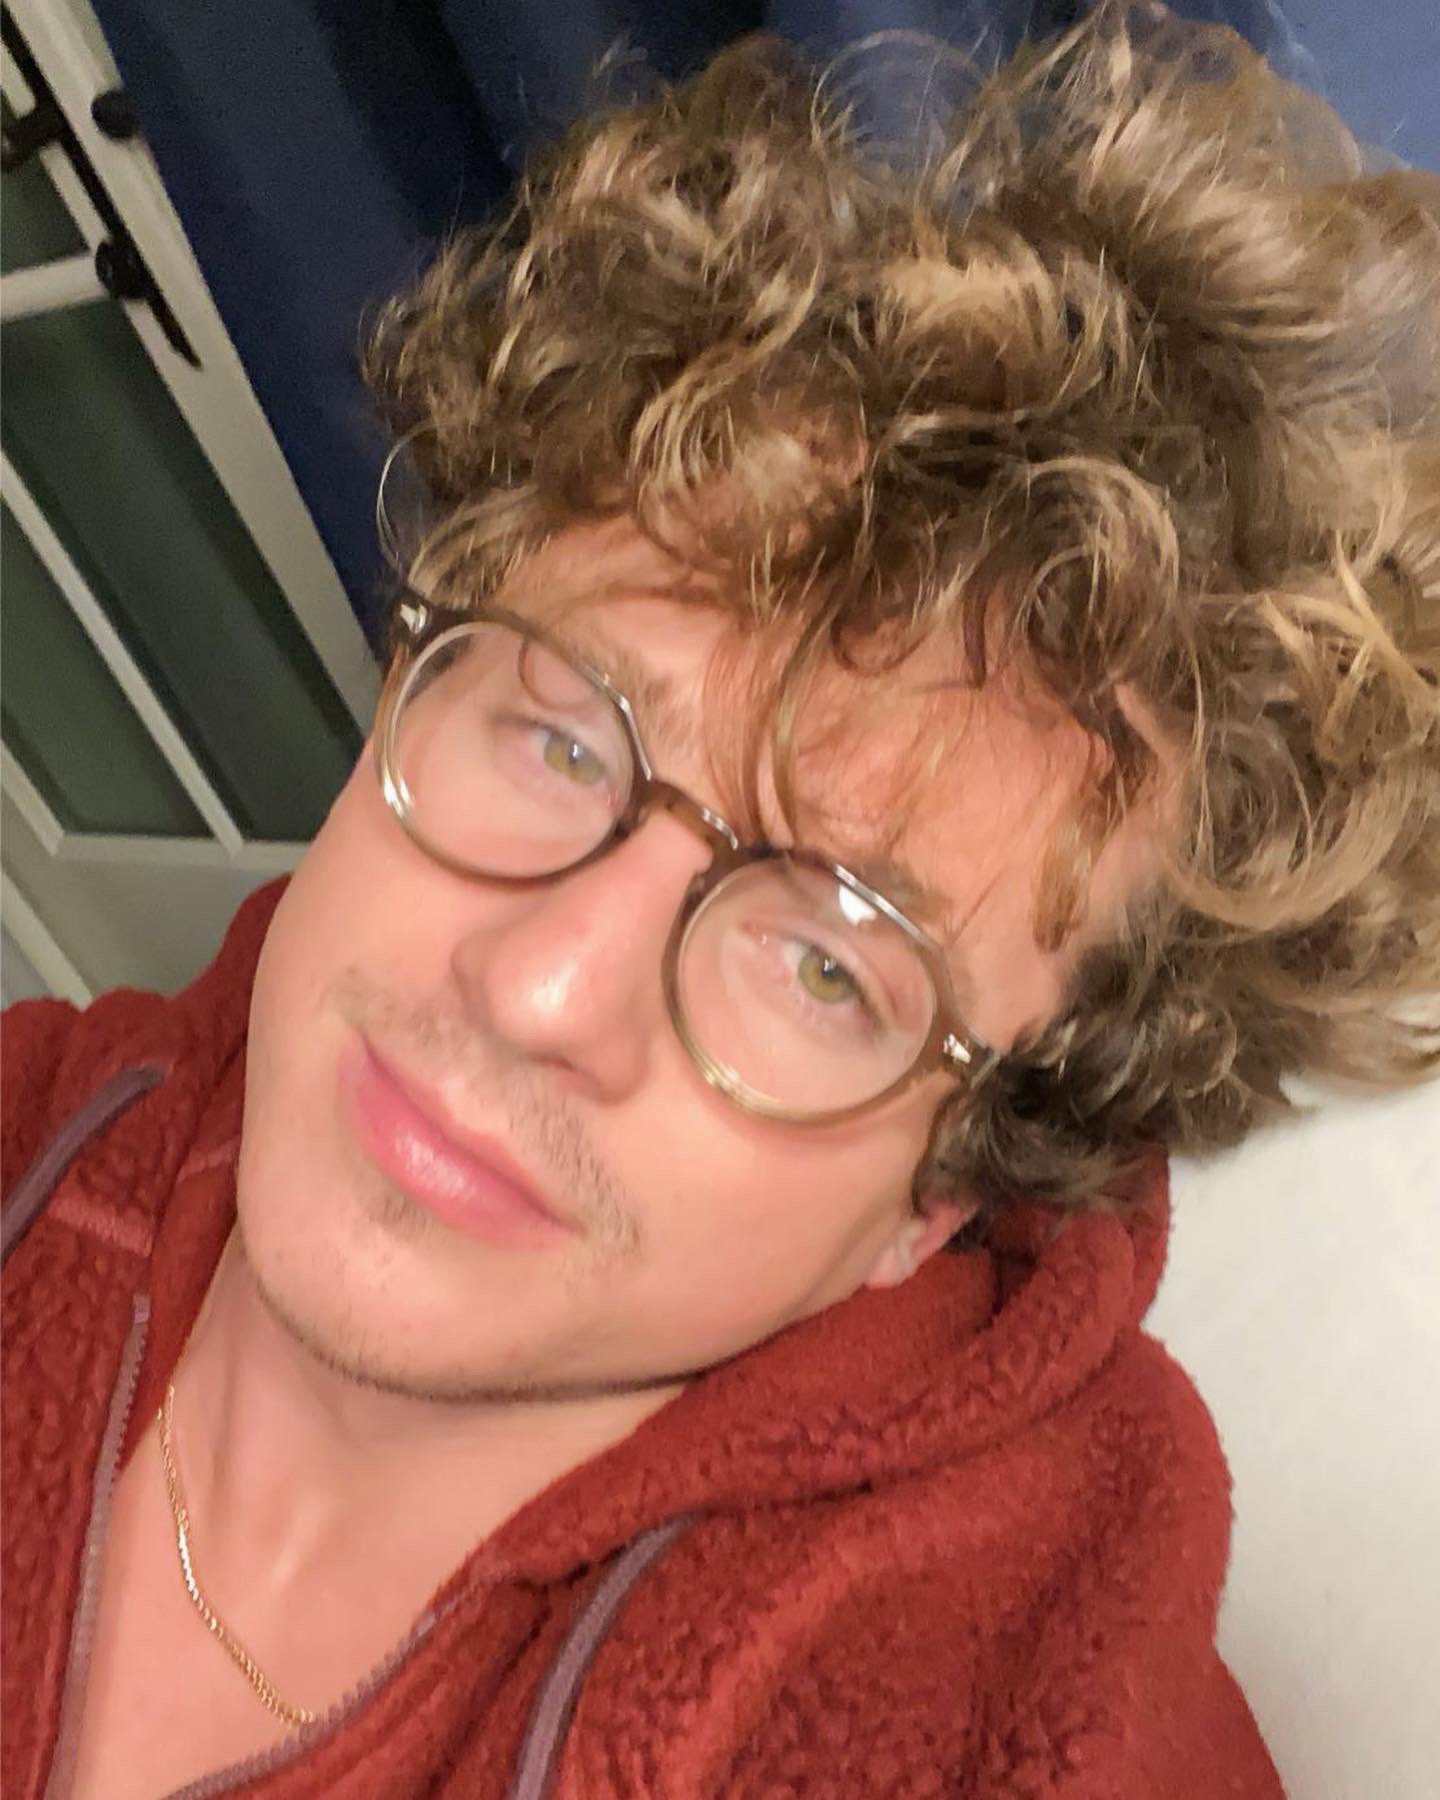 Charlie Puth says he once took a break midway through sex to record a song  I should have focused on the act a little bit more